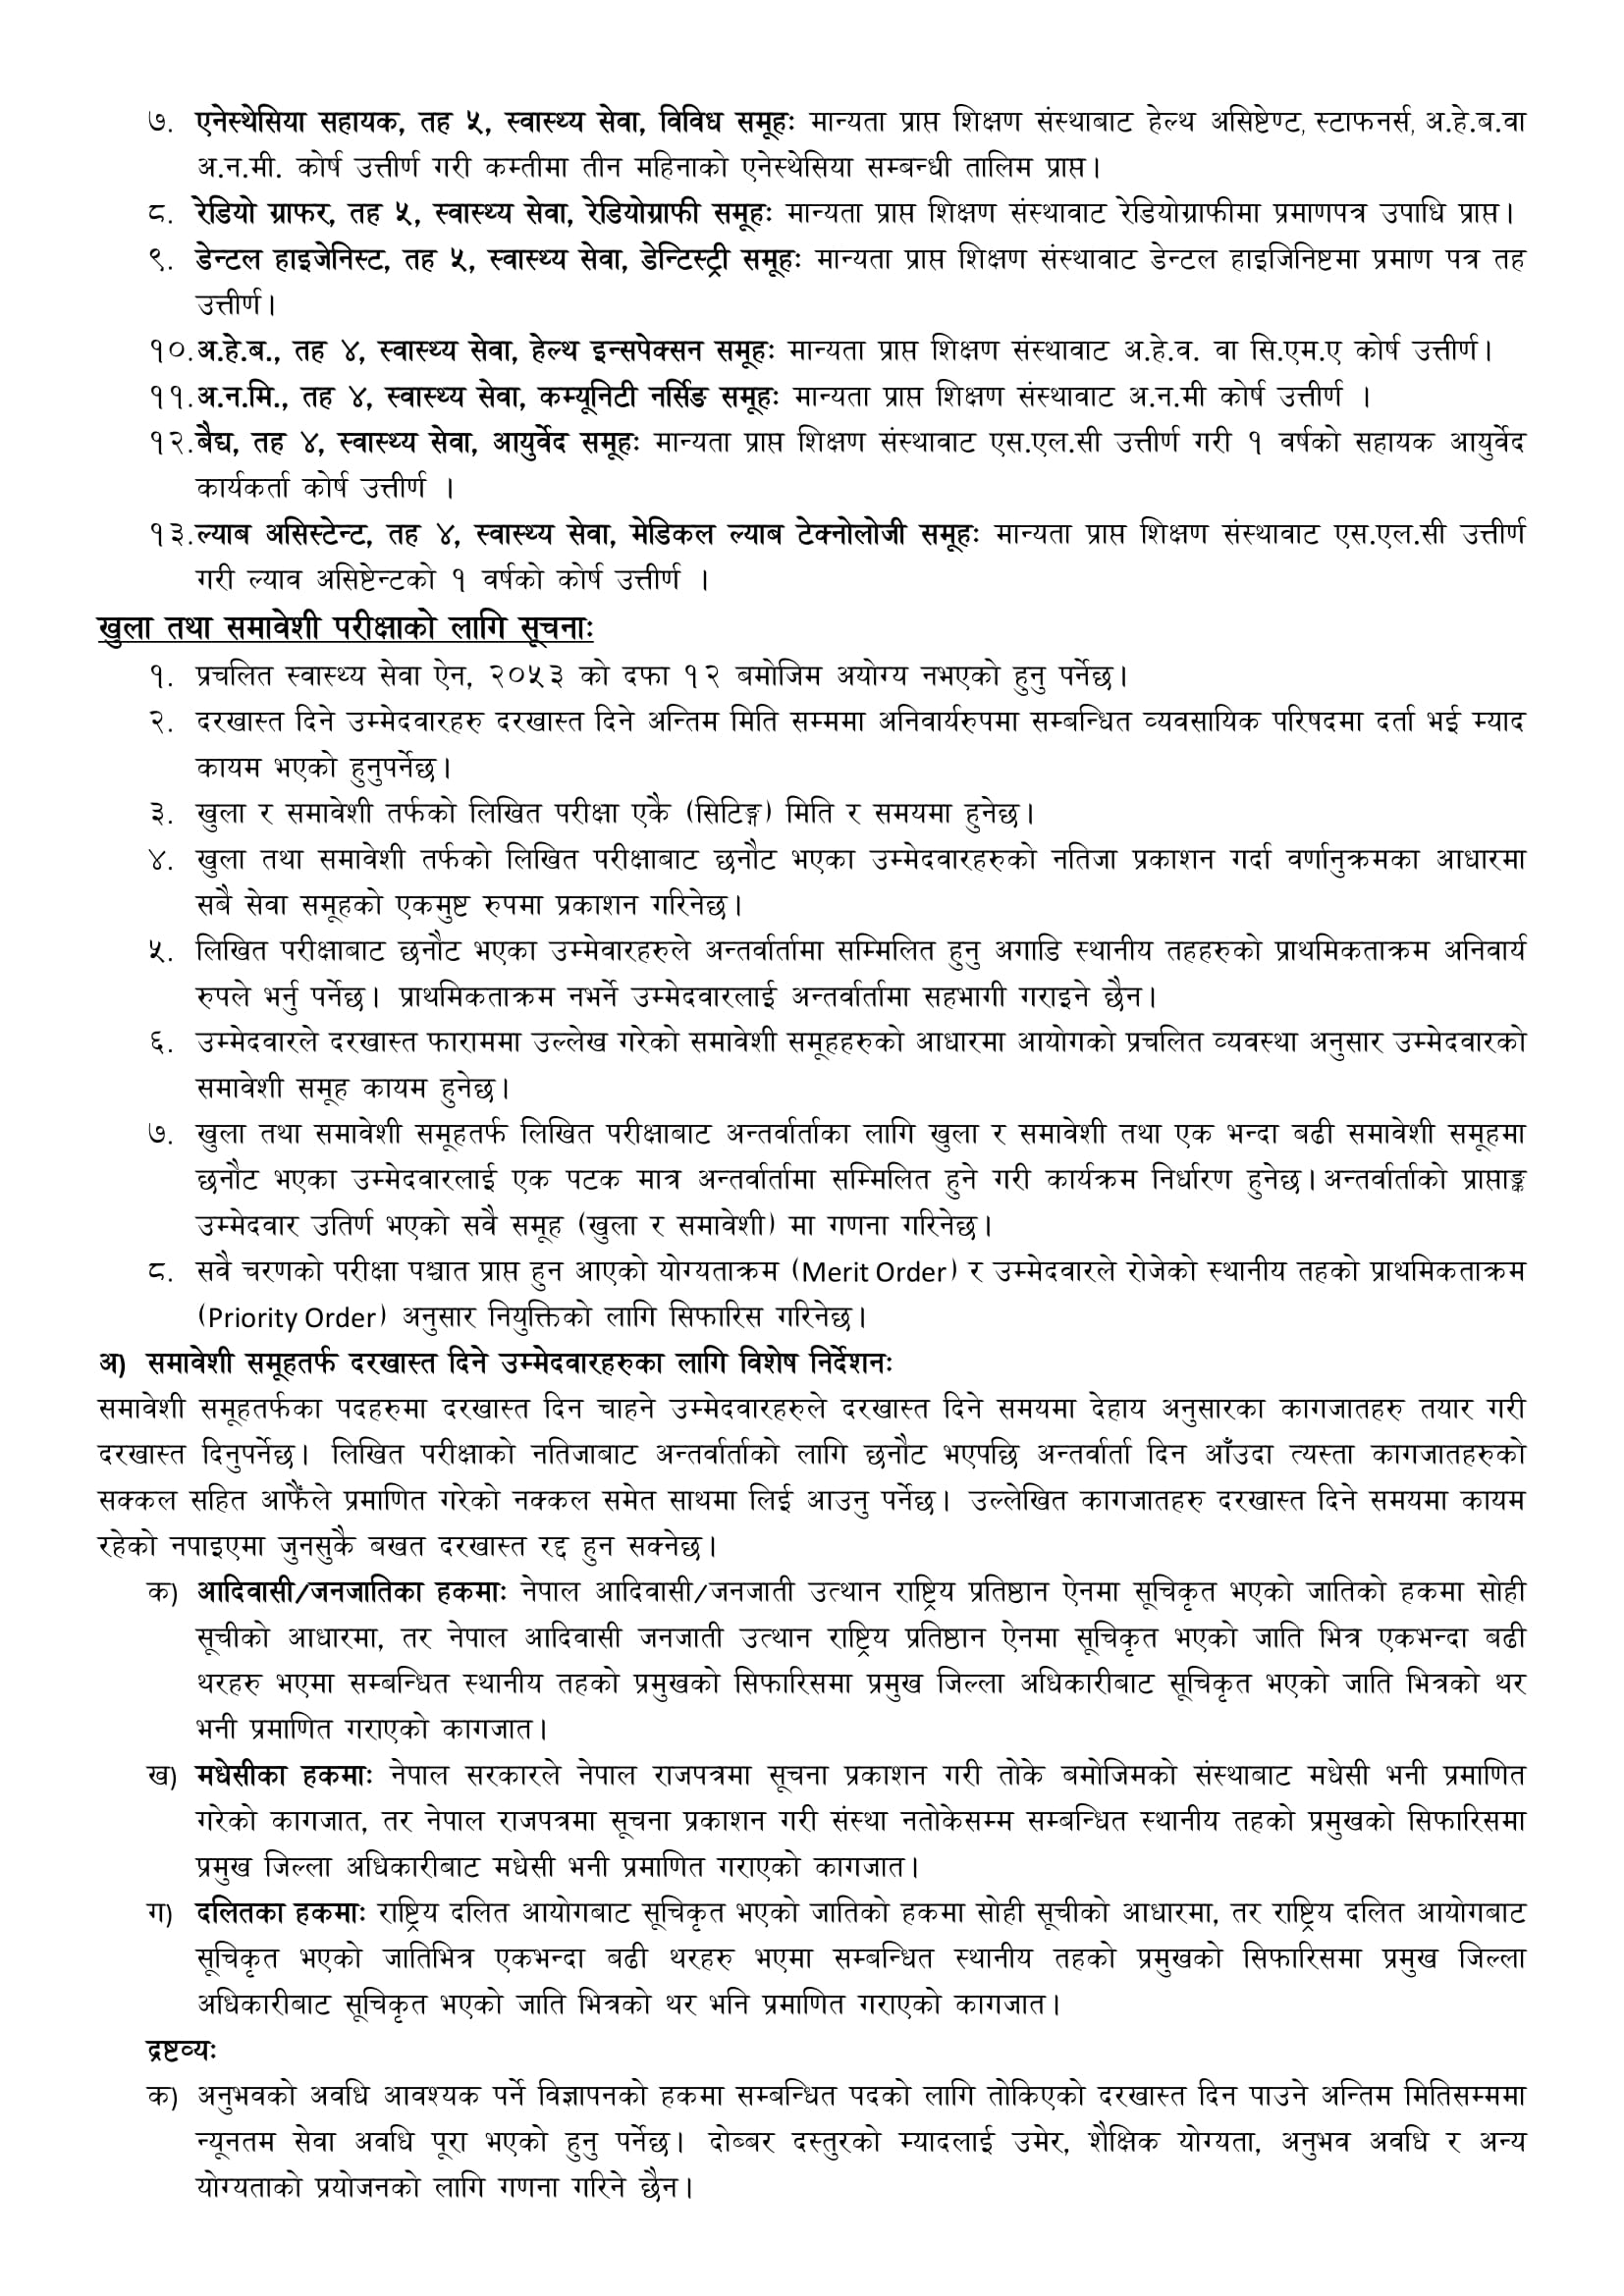 Public Service Commission Province 1 (Lok Sewa Aayog Pradesh 1) has published the vacancies of 622 health workers for the fourth and fifth level.